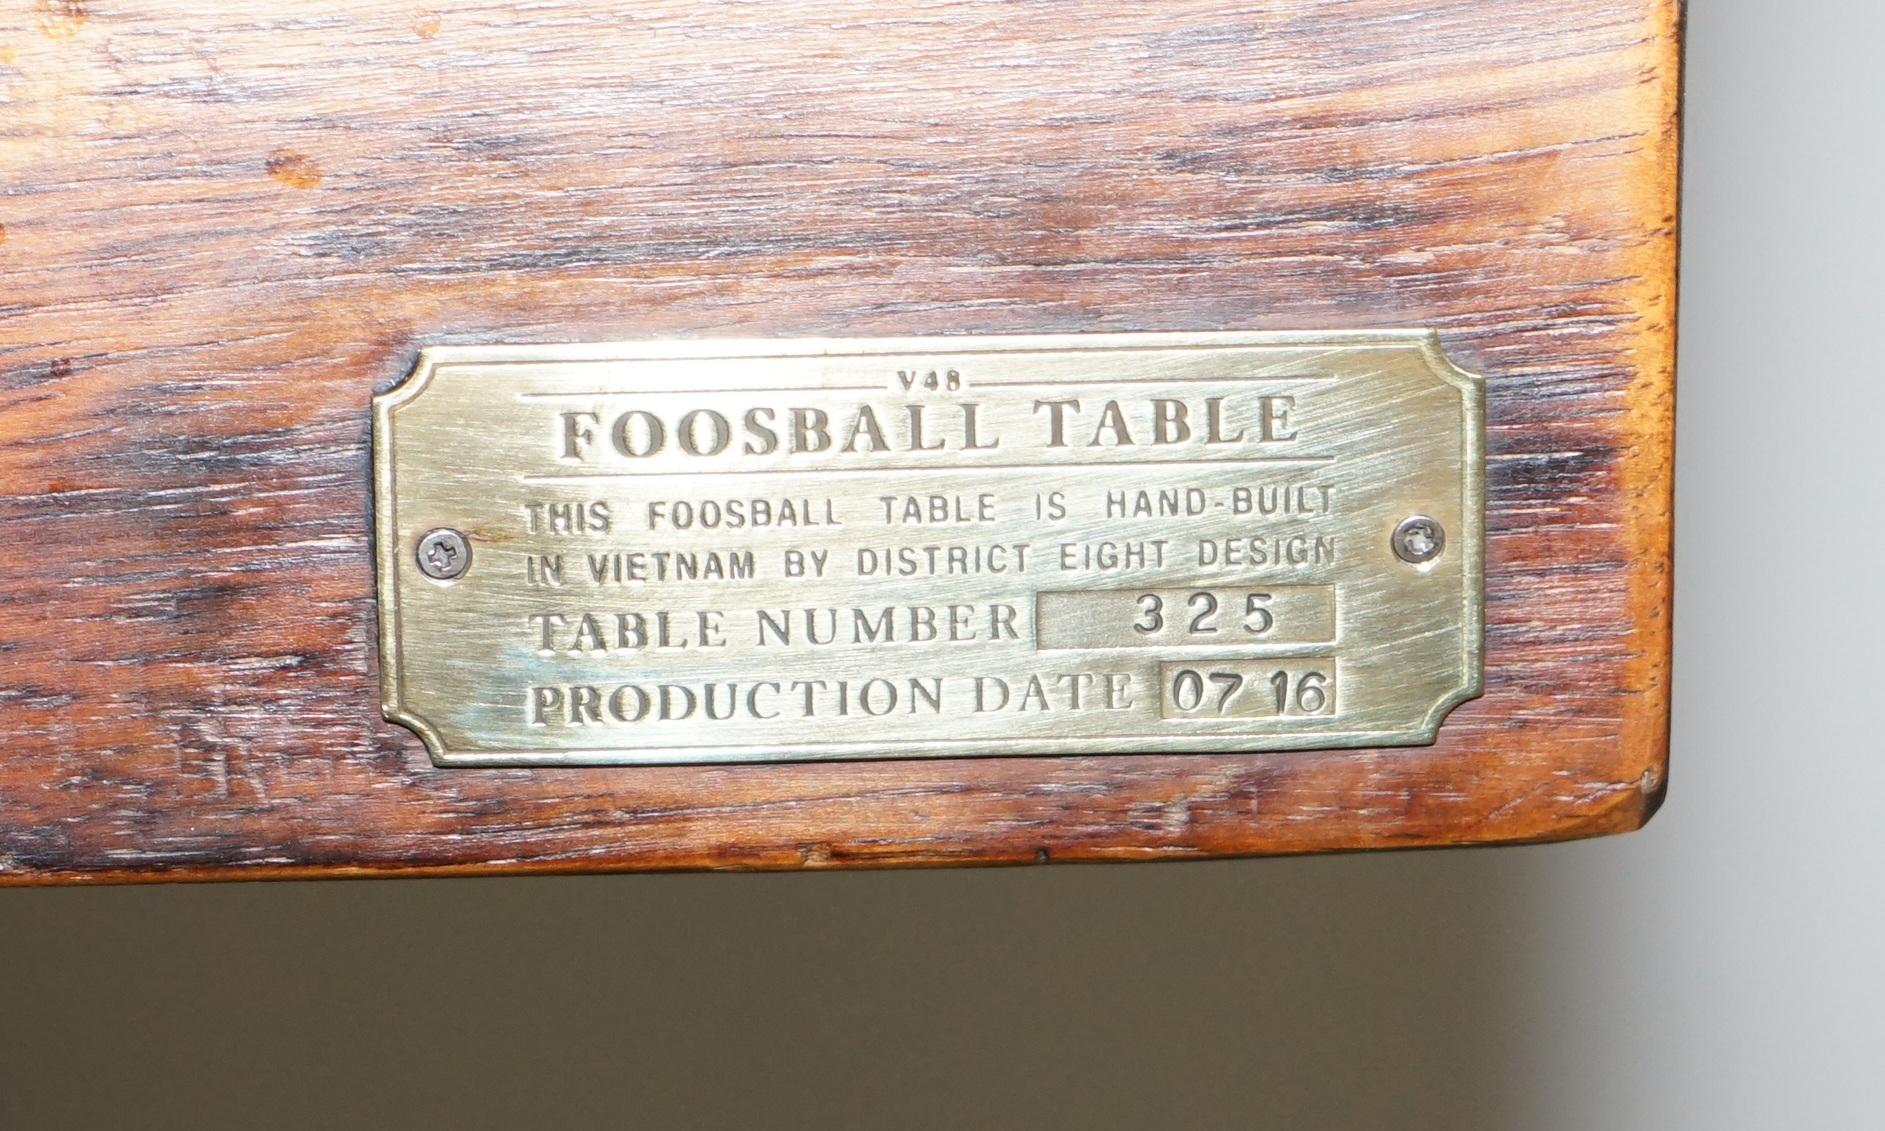 We are delighted to offer for sale this lovely limited edition 325 vintage foosball table made by District Eight design 

A very good looking well made and decorative piece, constructed with reclaimed hardwood, aluminium players, a stone playing